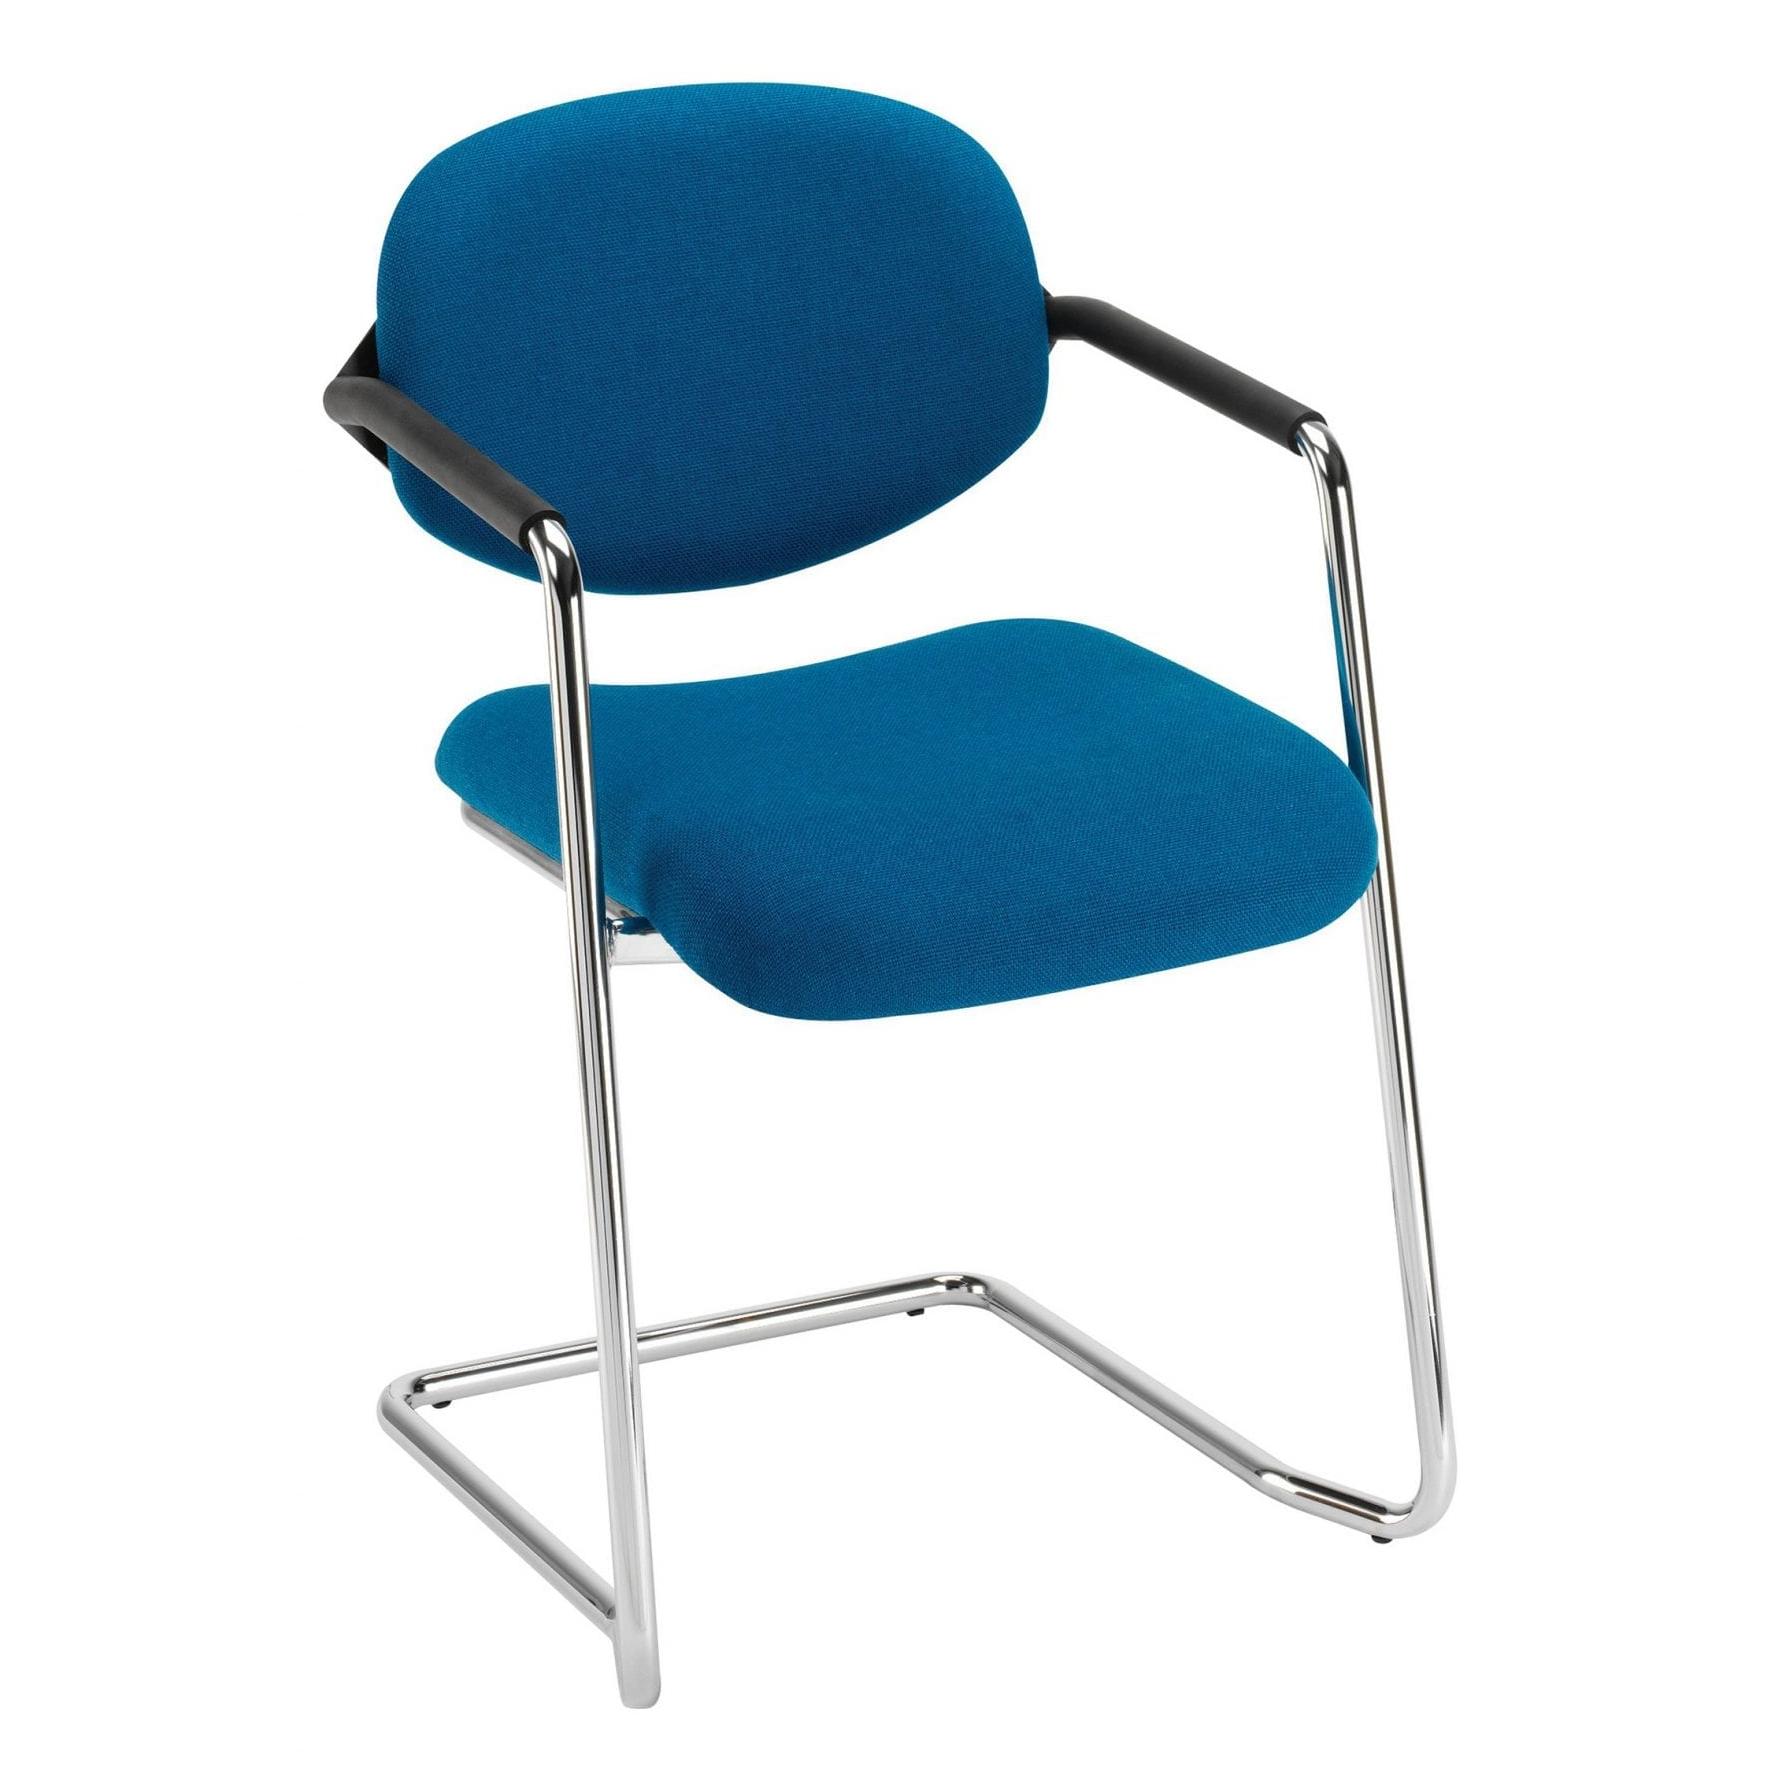 G15 stacking chair